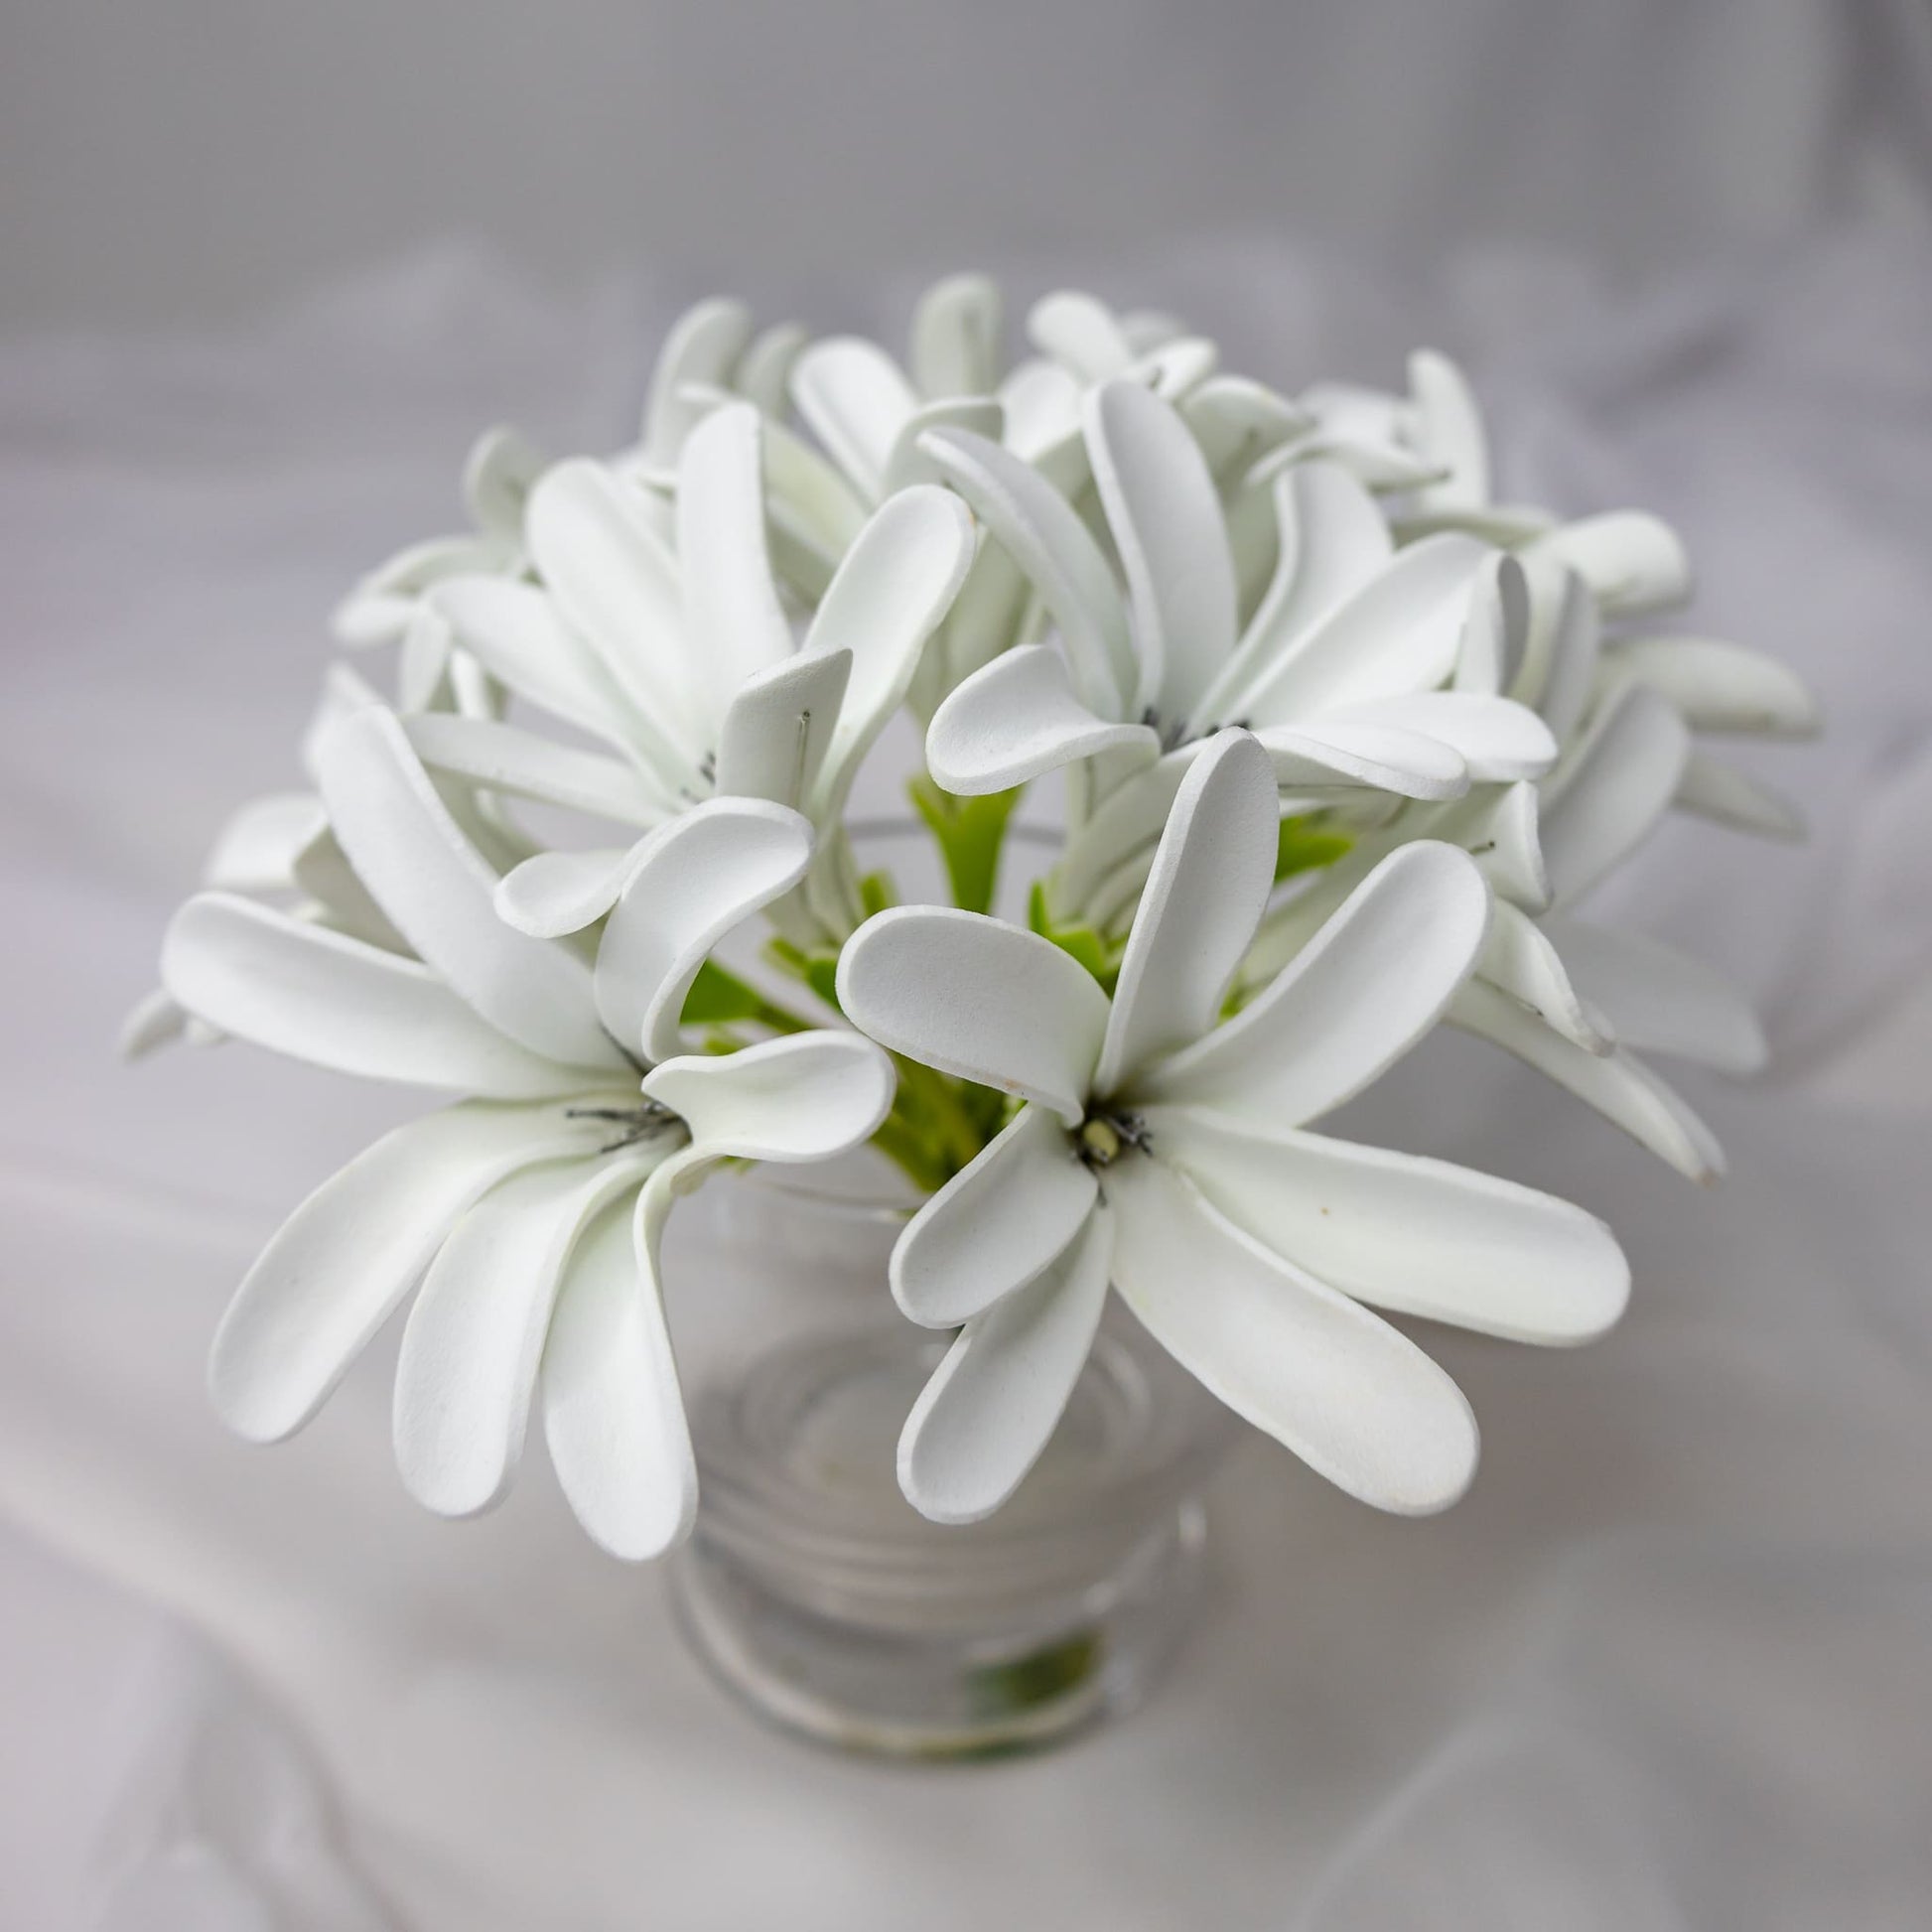 artificial tahitian gardenia flowers placed in transparent glass vase